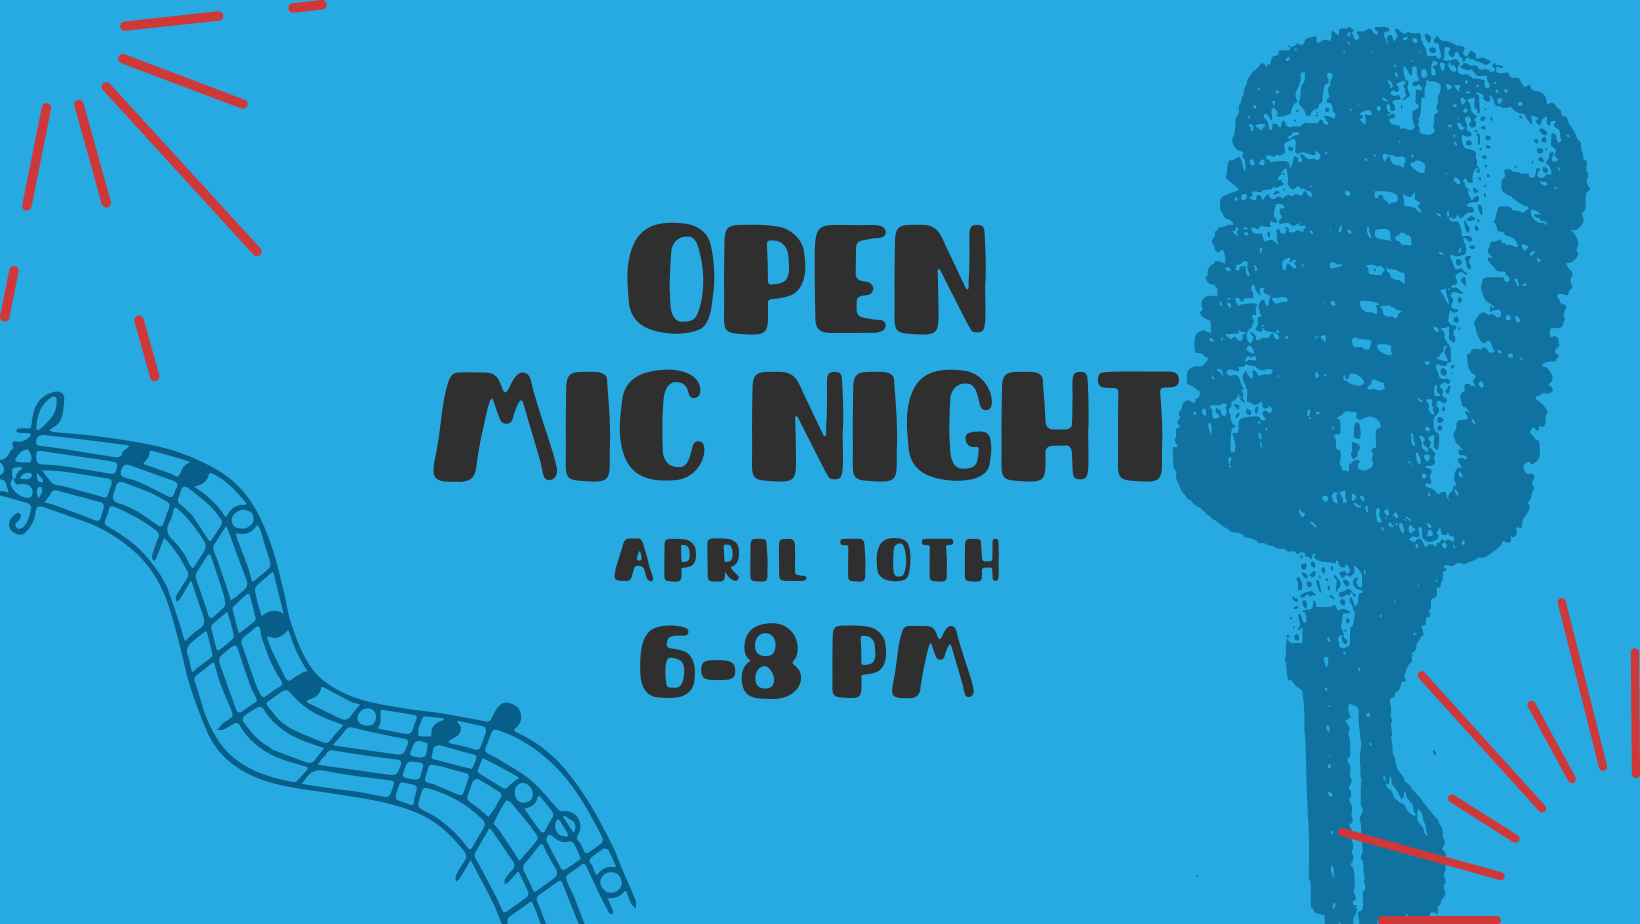 Open Mic night on April 10th from 6 to 8 pm.